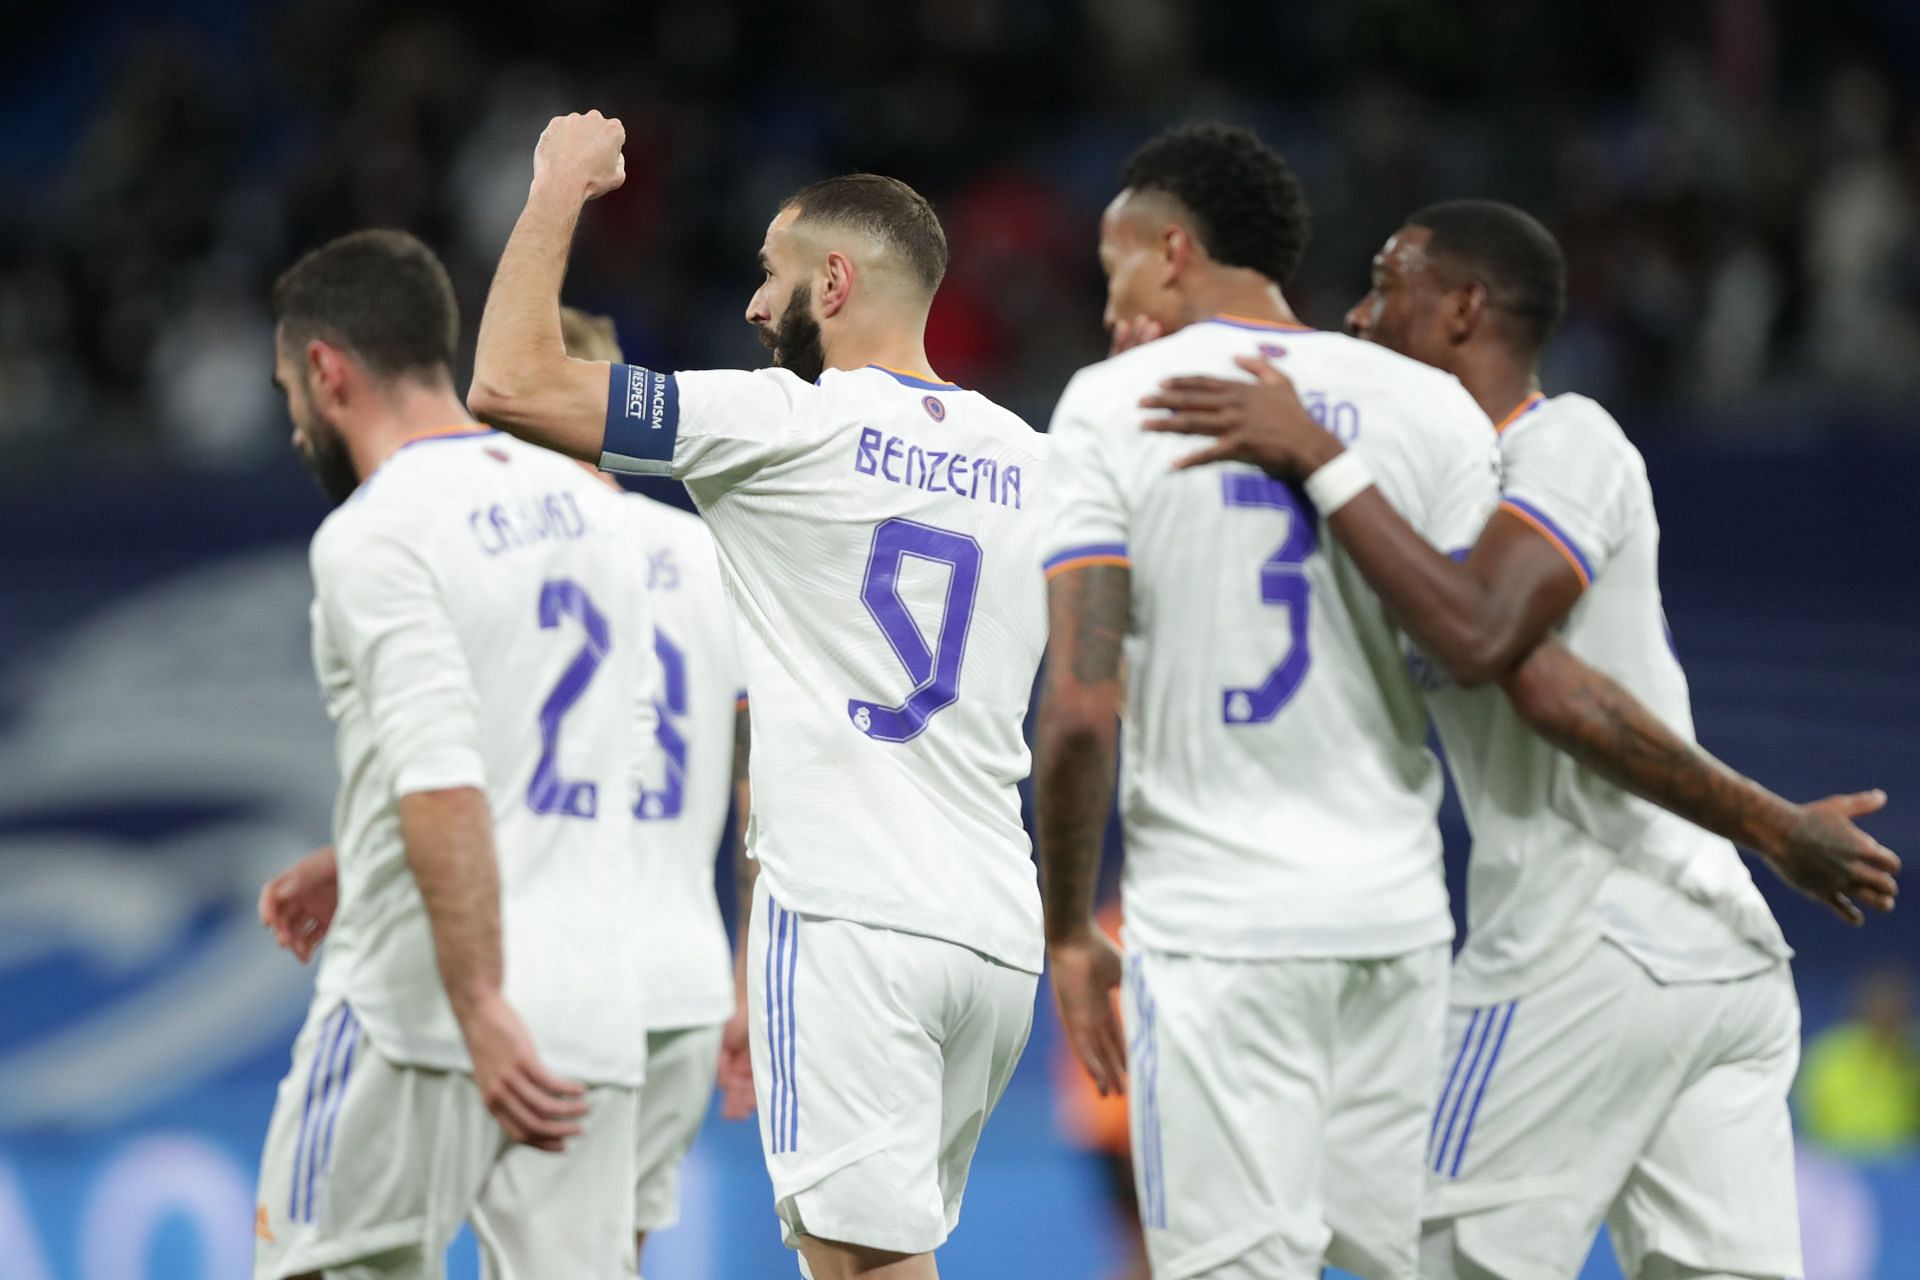 Real Madrid have won eight matches on the bounce.